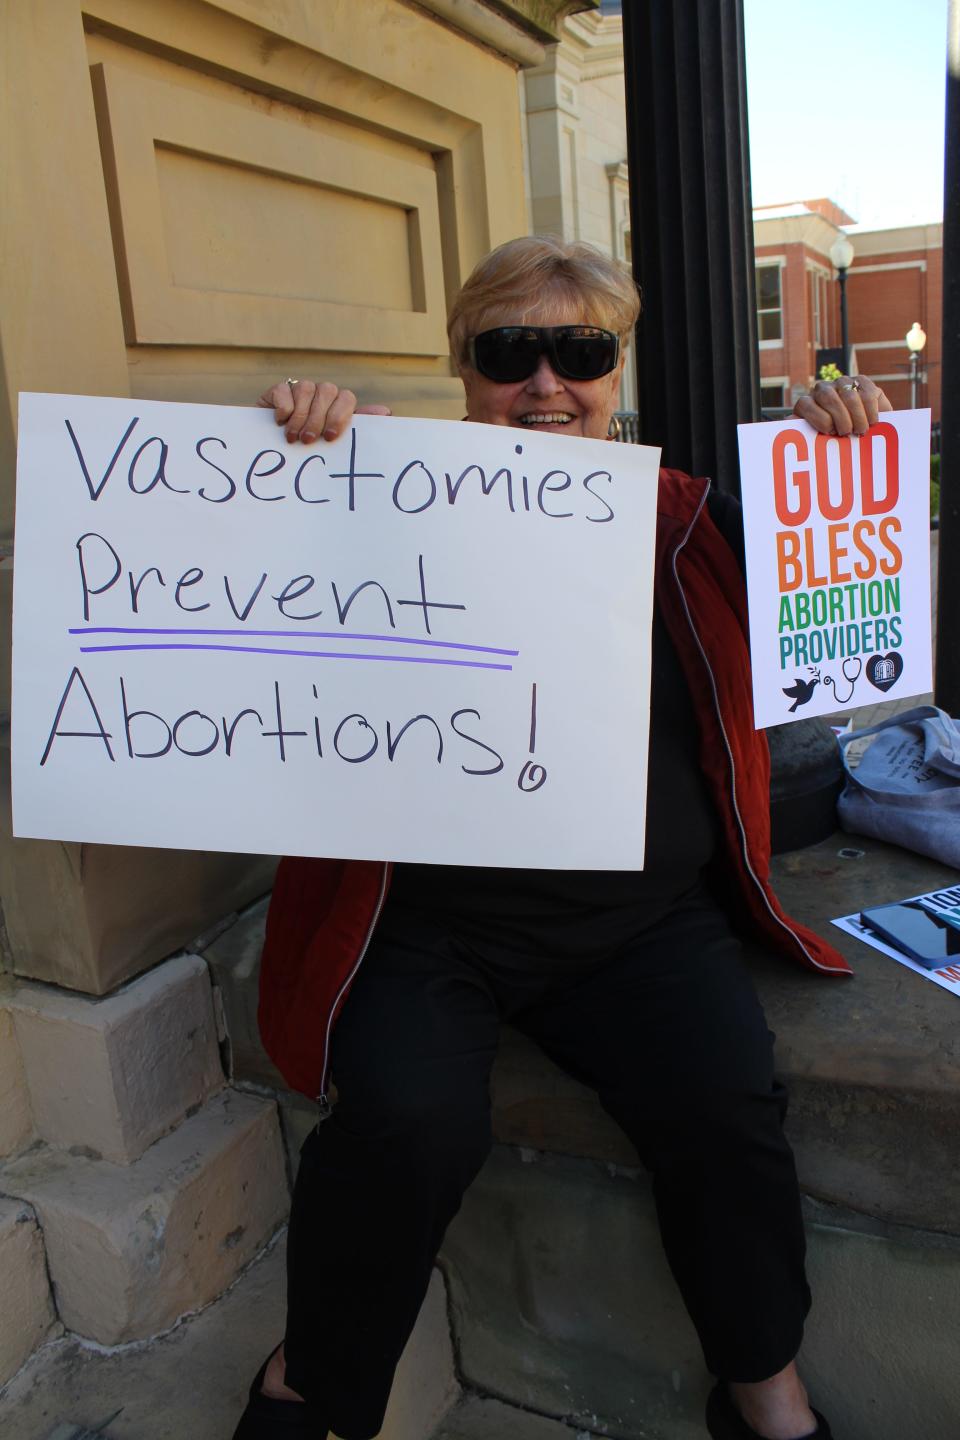 Amy Van Voorhis, an 81-year-old woman, was one of the first protestors to come to the Ross County courthouse to protest the potential Supreme Court decision to overturn Roe v. Wade.